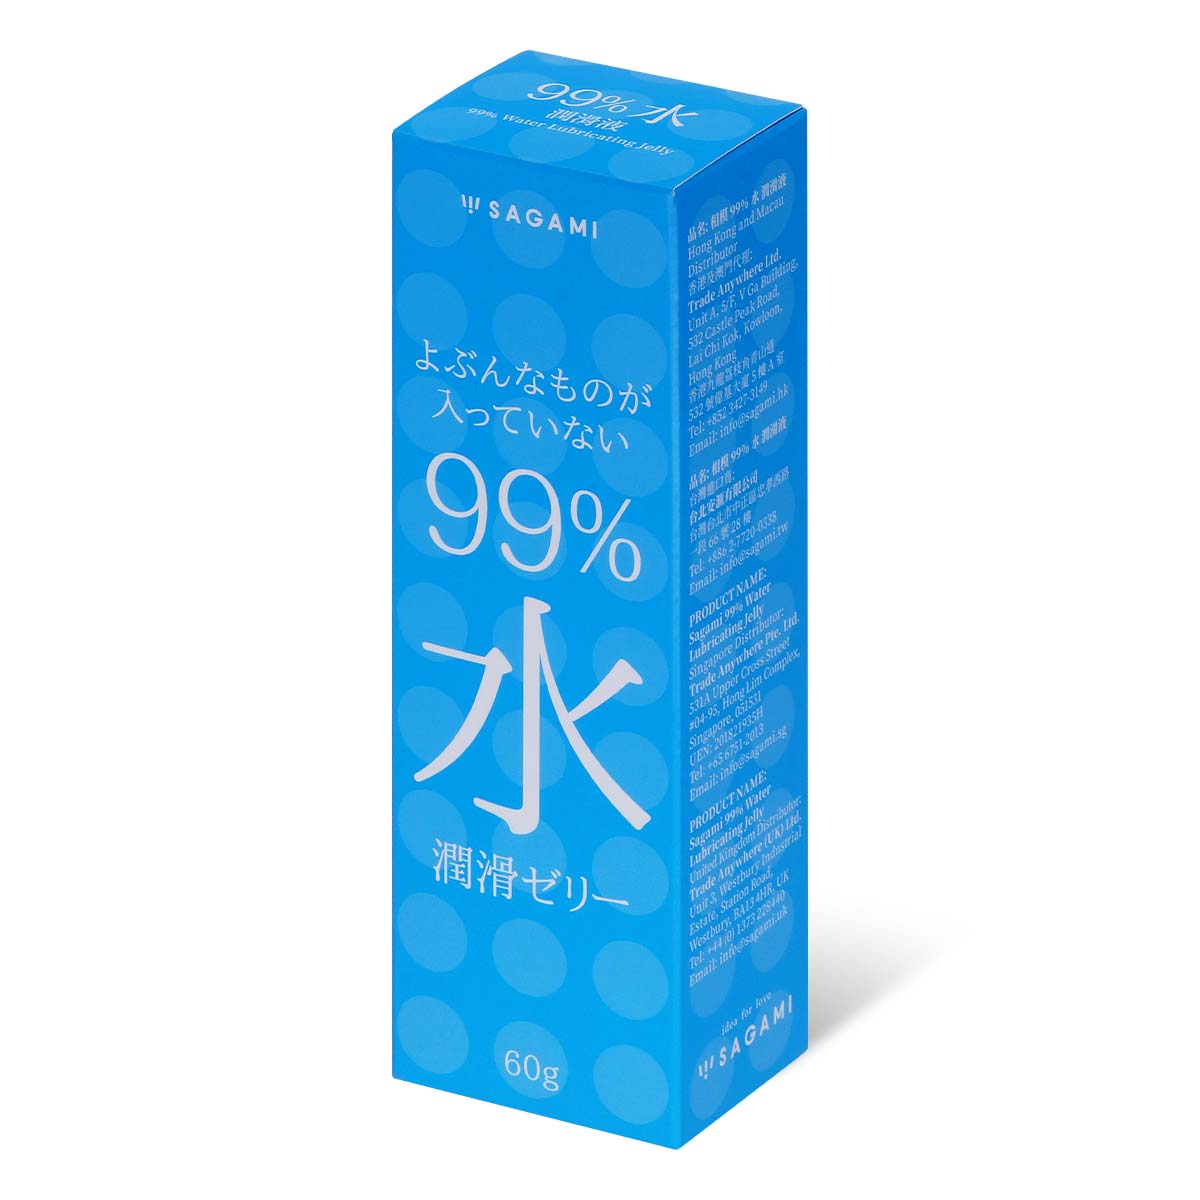 Sagami 99% Water Lubricating Jelly 60g Water-based Lubricant-p_1